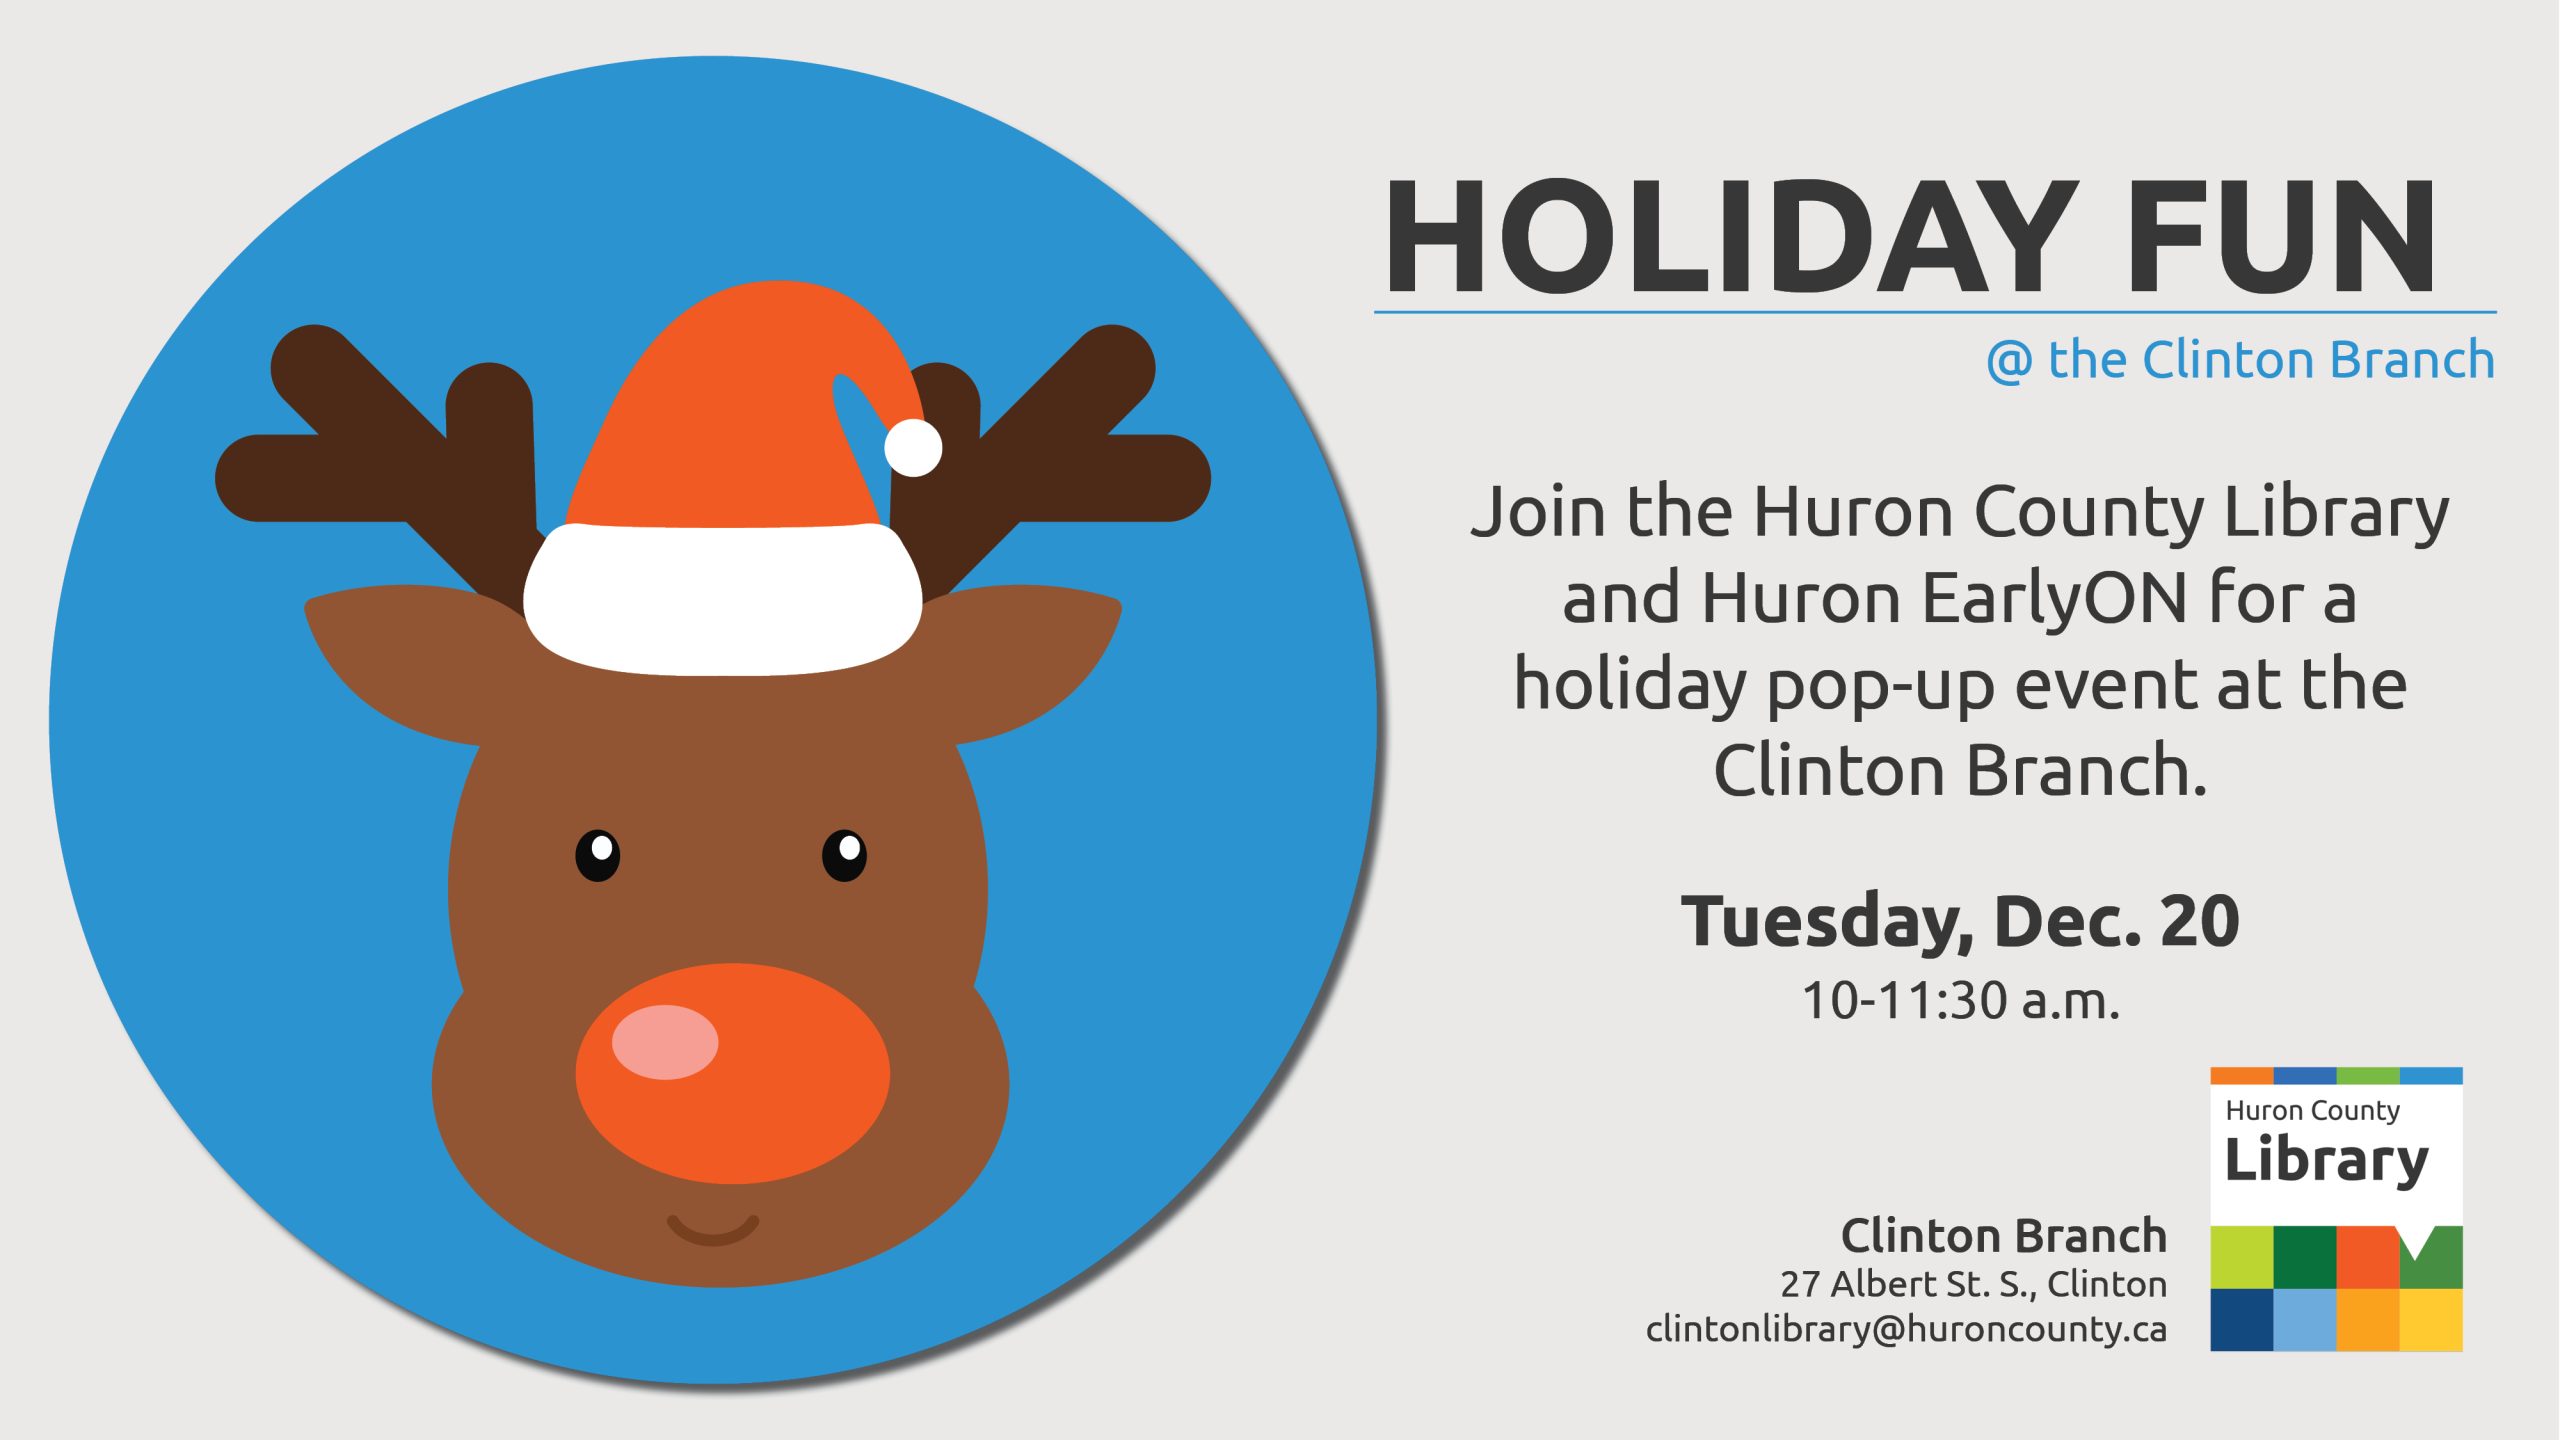 Illustration of a reindeer with text promoting holiday fun activities at the Clinton Branch